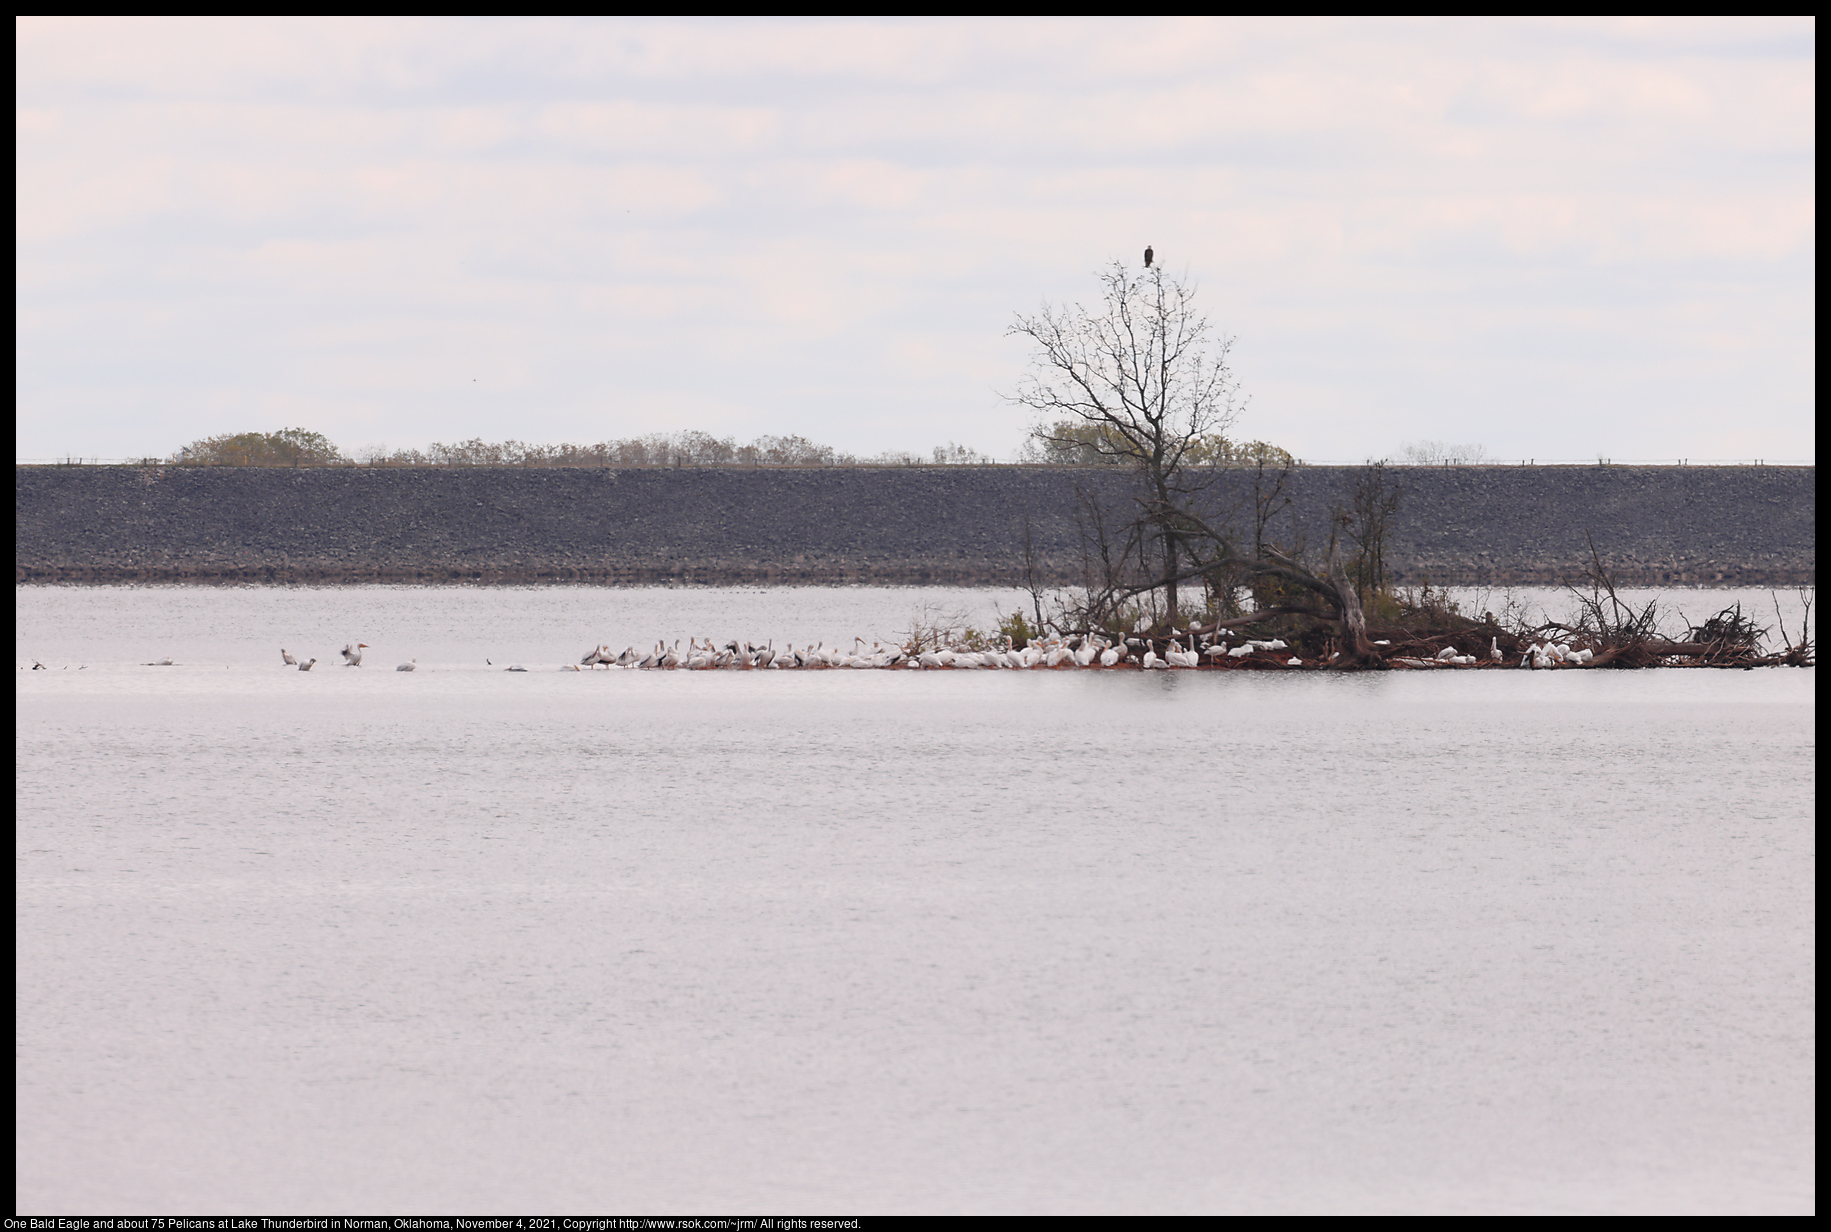 One Bald Eagle and about 75 Pelicans at Lake Thunderbird in Norman, Oklahoma, November 4, 2021